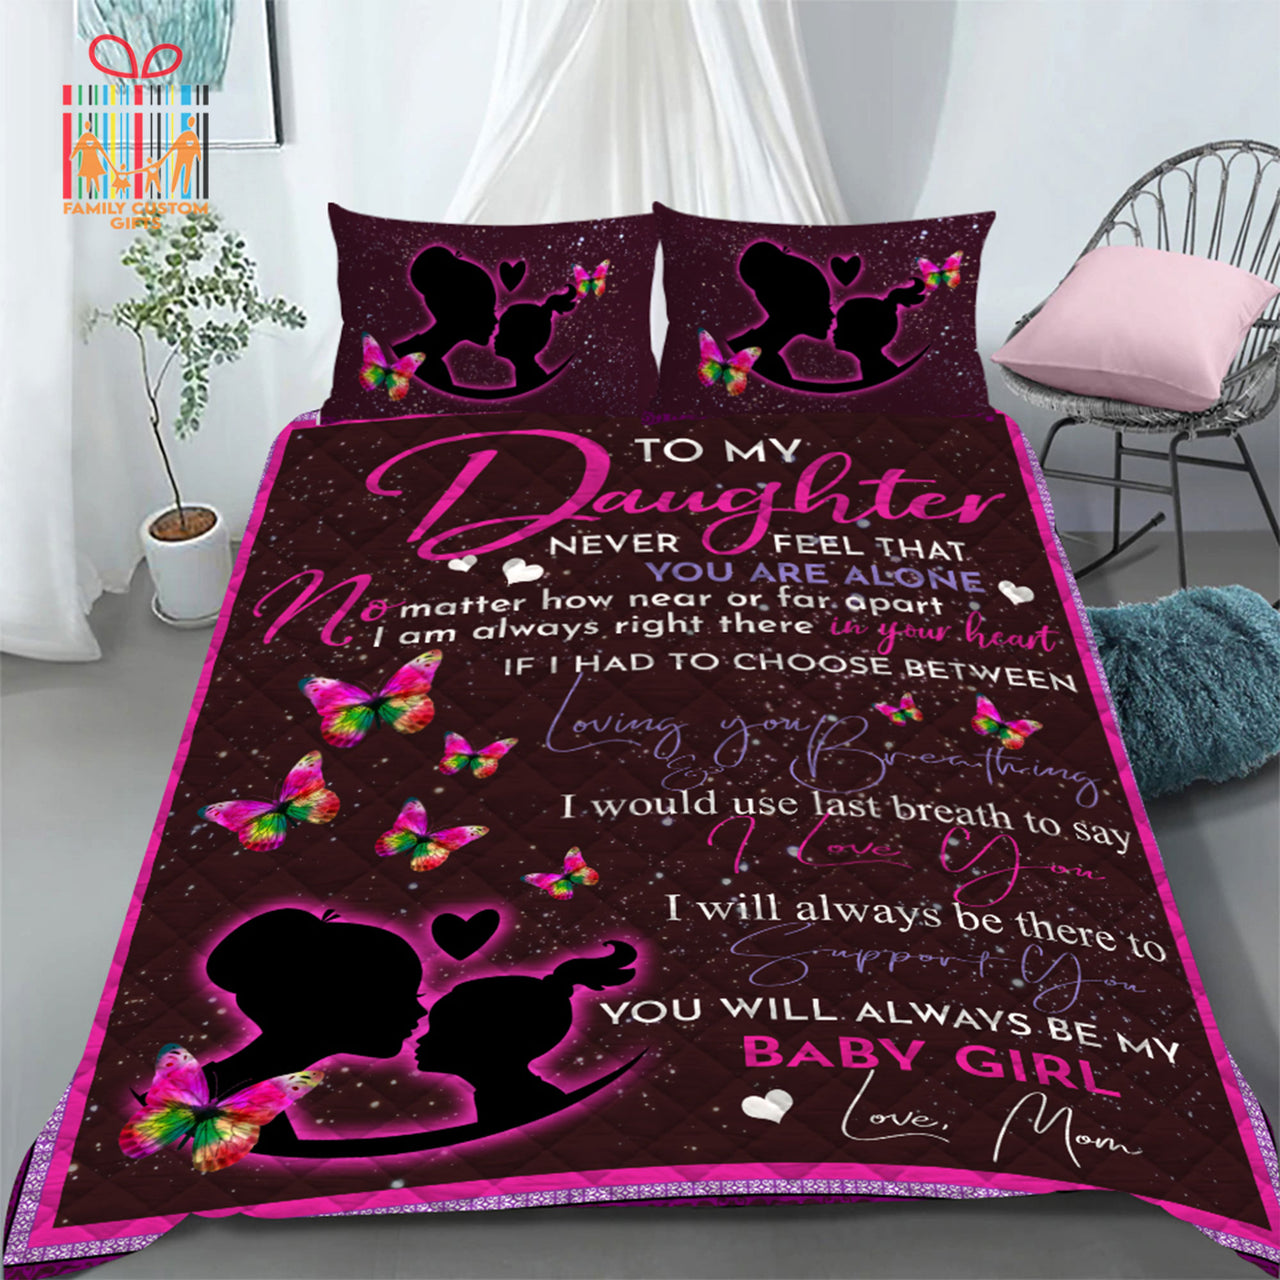 Comforter To My Daughter from Mom 1 Custom Bedding Set for Kids Teens Adult Personalized Premium Bed Set